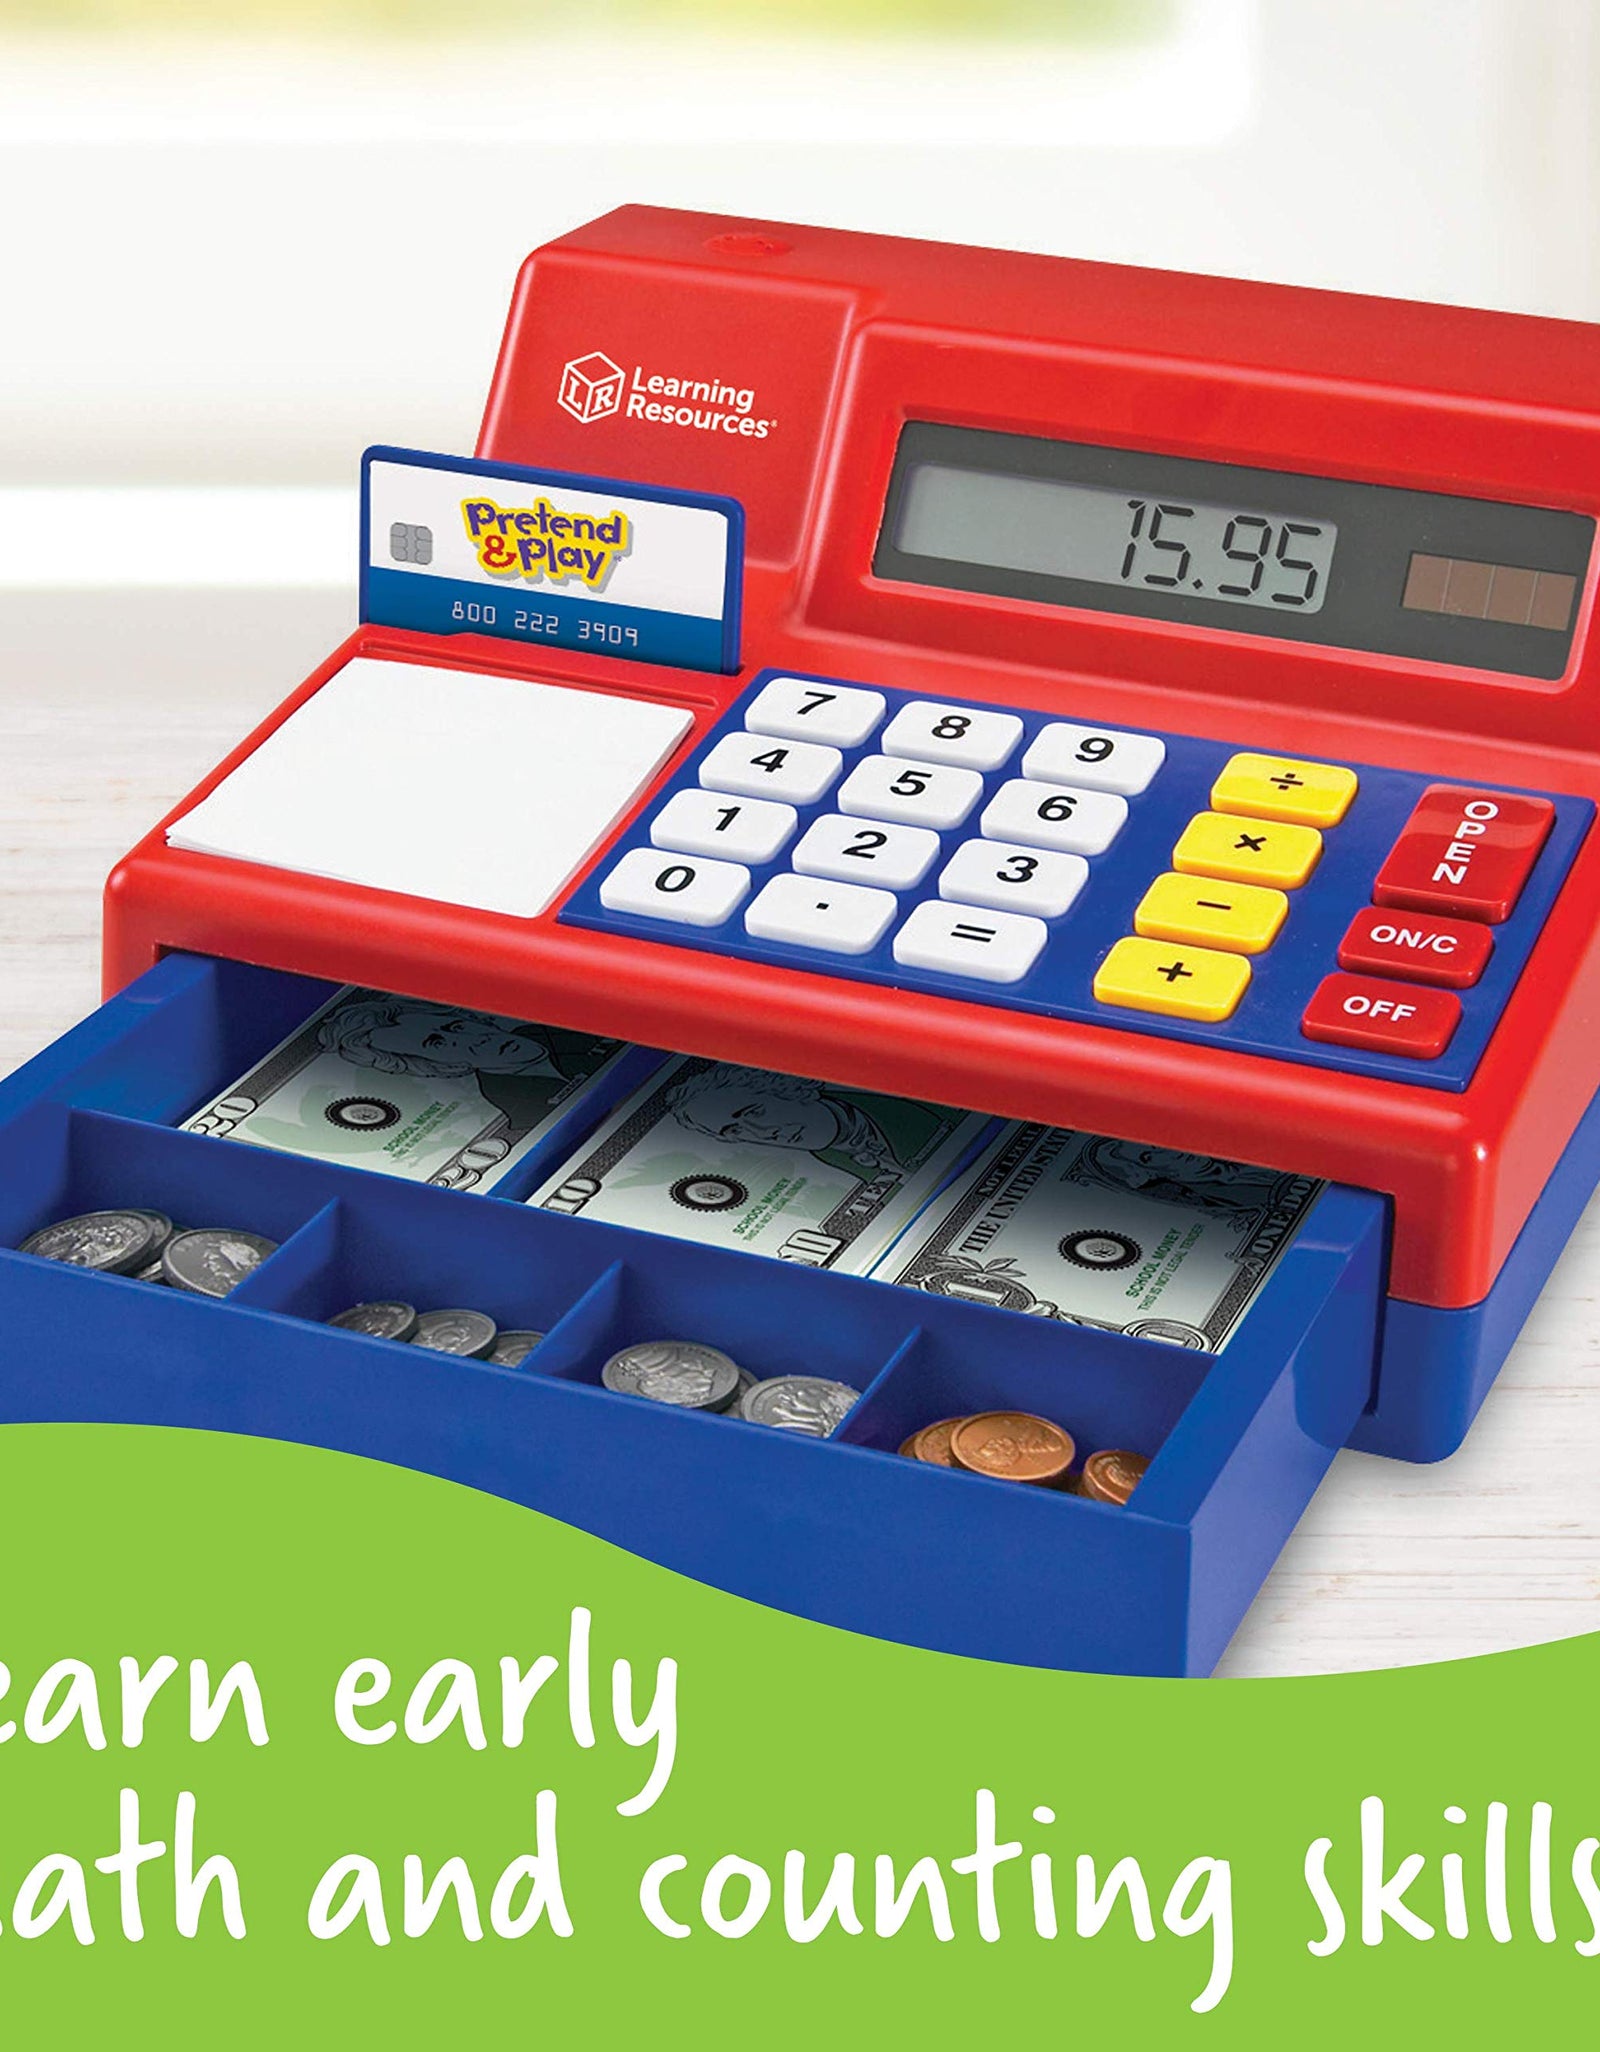 Learning Resources Pretend & Play Calculator Cash Register, Pretend Play Toys, Classic Counting Toy, Play Cash Register for Kids, Develops Early Math Skills, 73 Pieces, Ages 3+